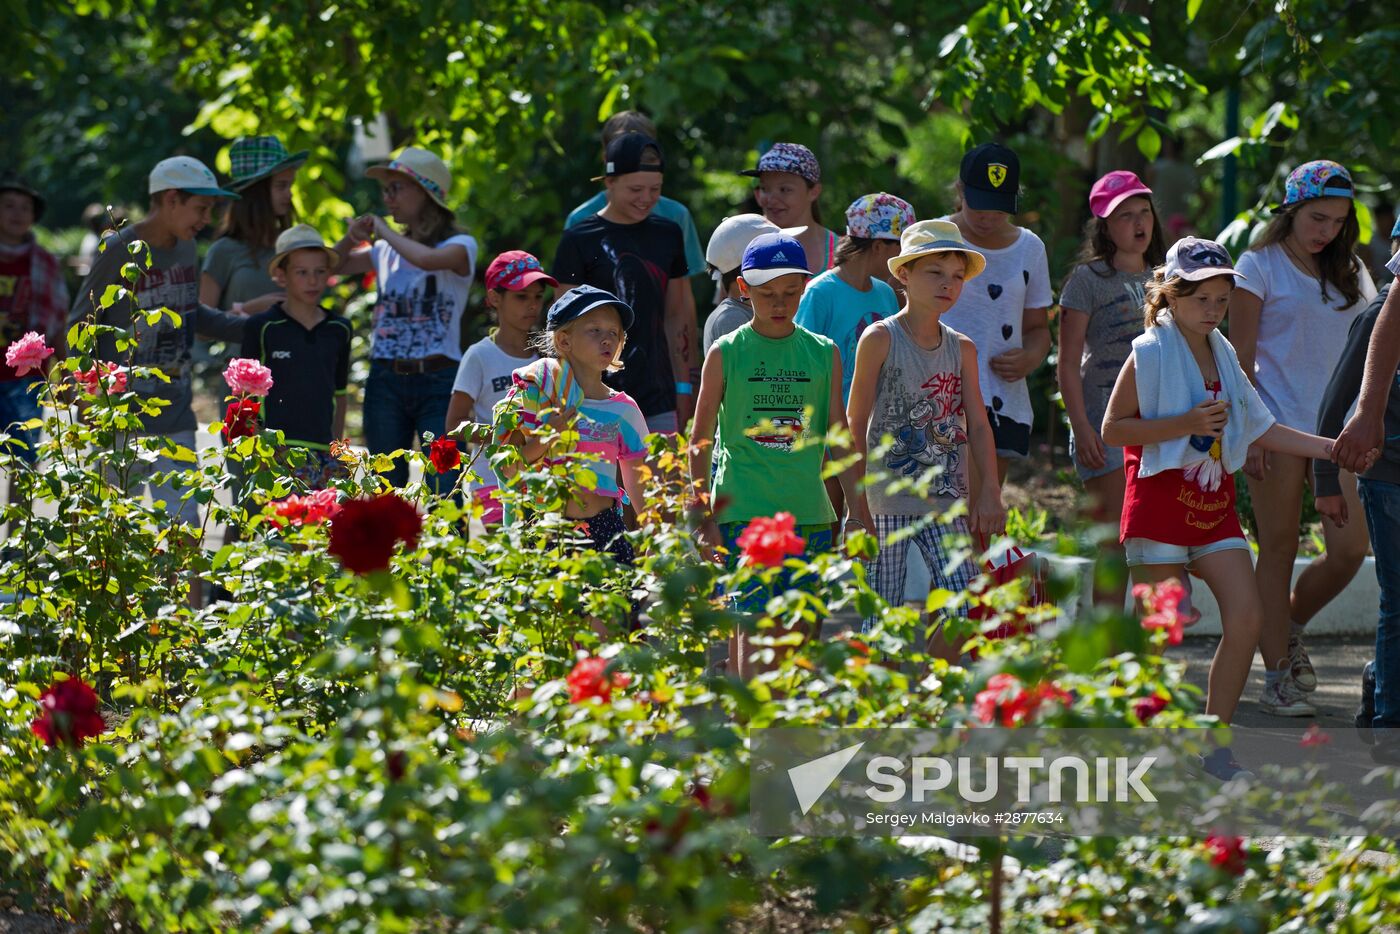 The Brigantina physical fitness camp for children in Crimea